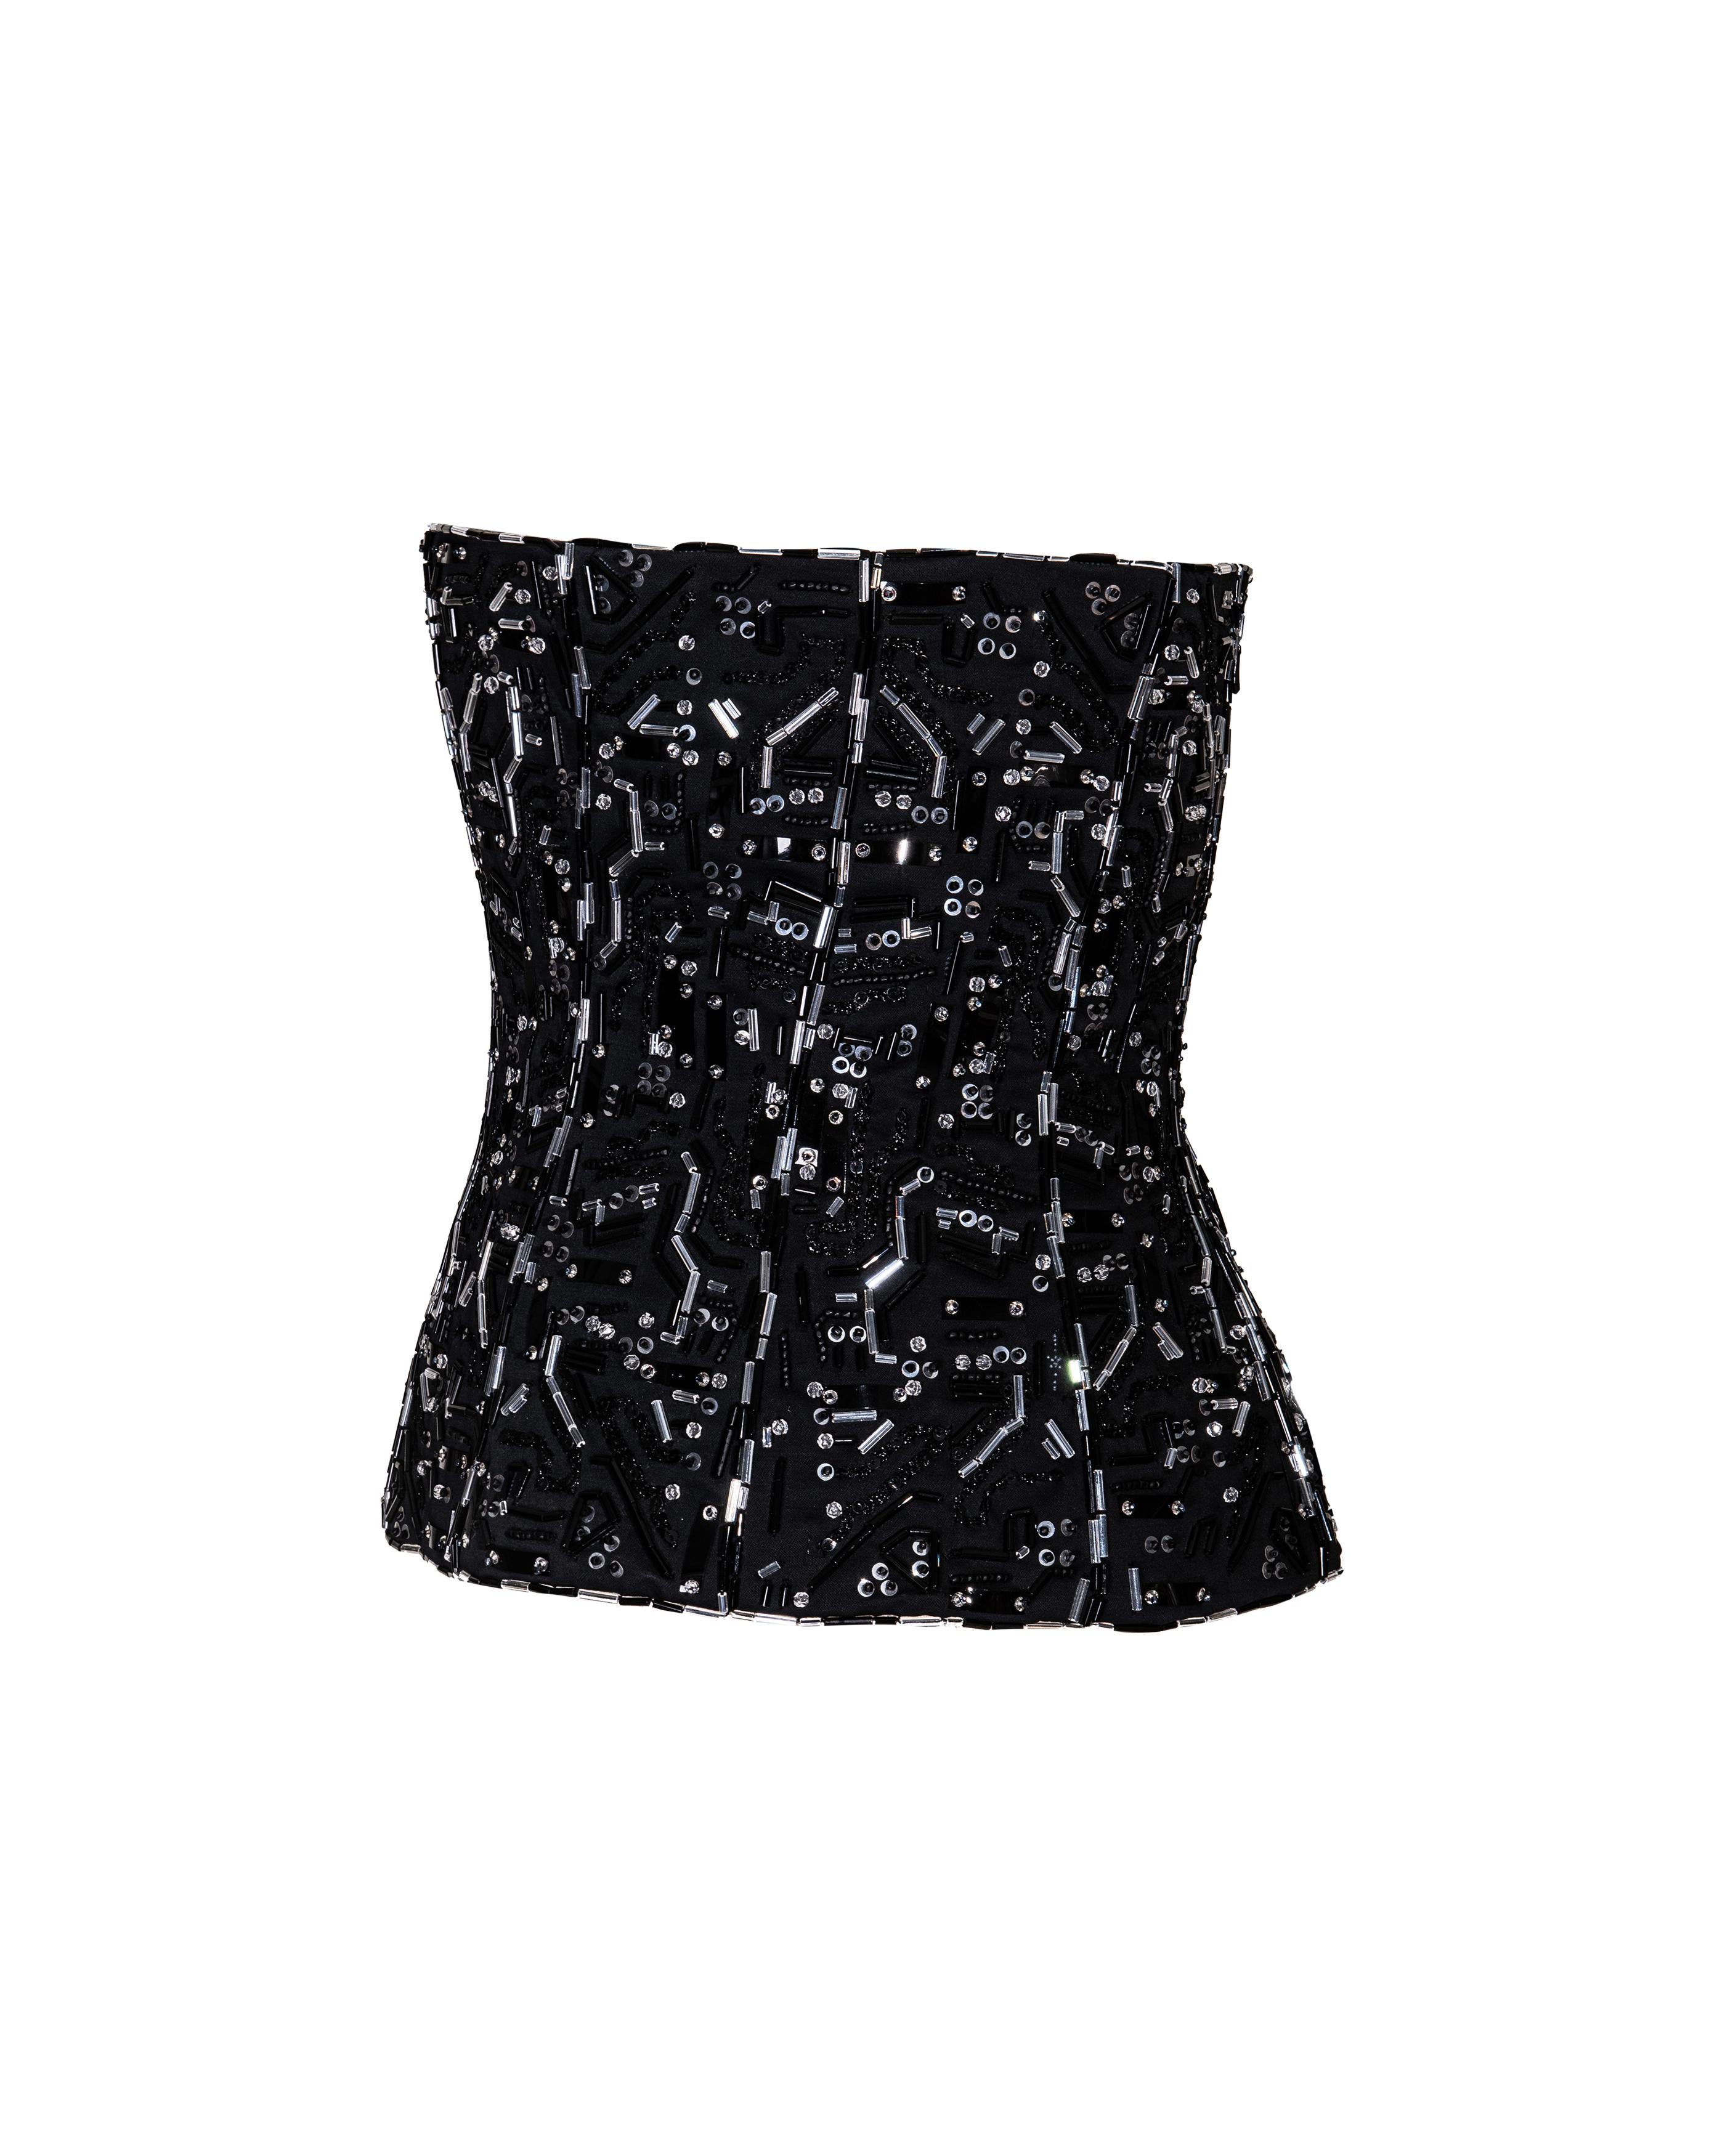 A/W 1999 Givenchy by Alexander McQueen Circuit Board Black Embellished Corset In Excellent Condition For Sale In North Hollywood, CA